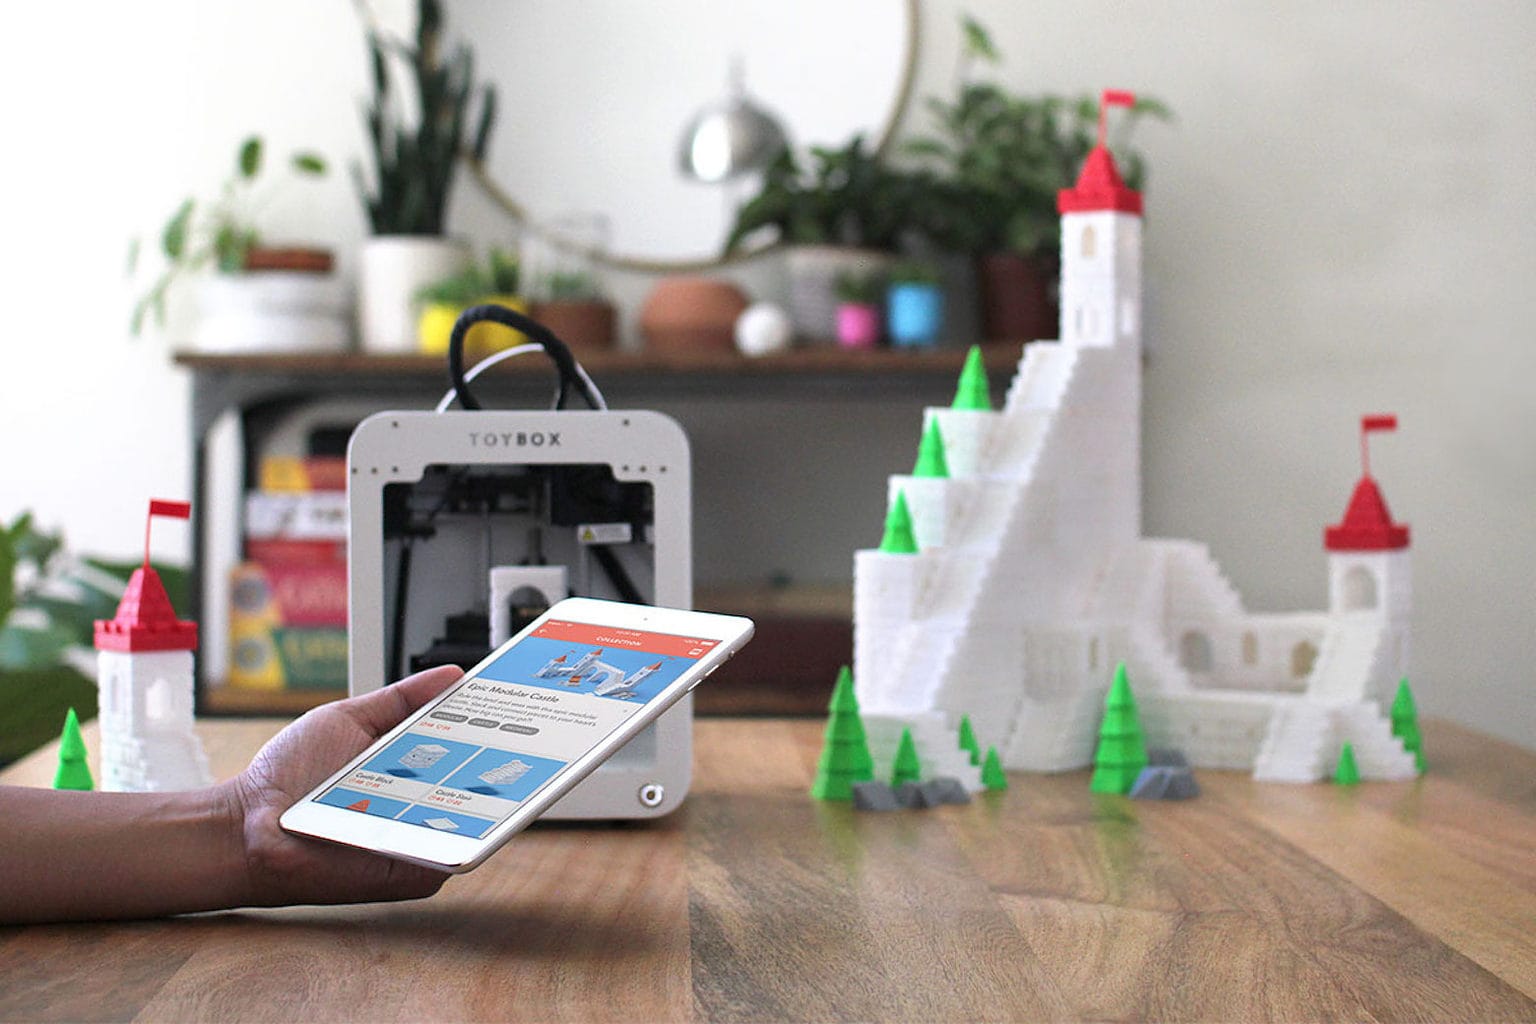 Make new toys and memories with great savings on this 3D printer.